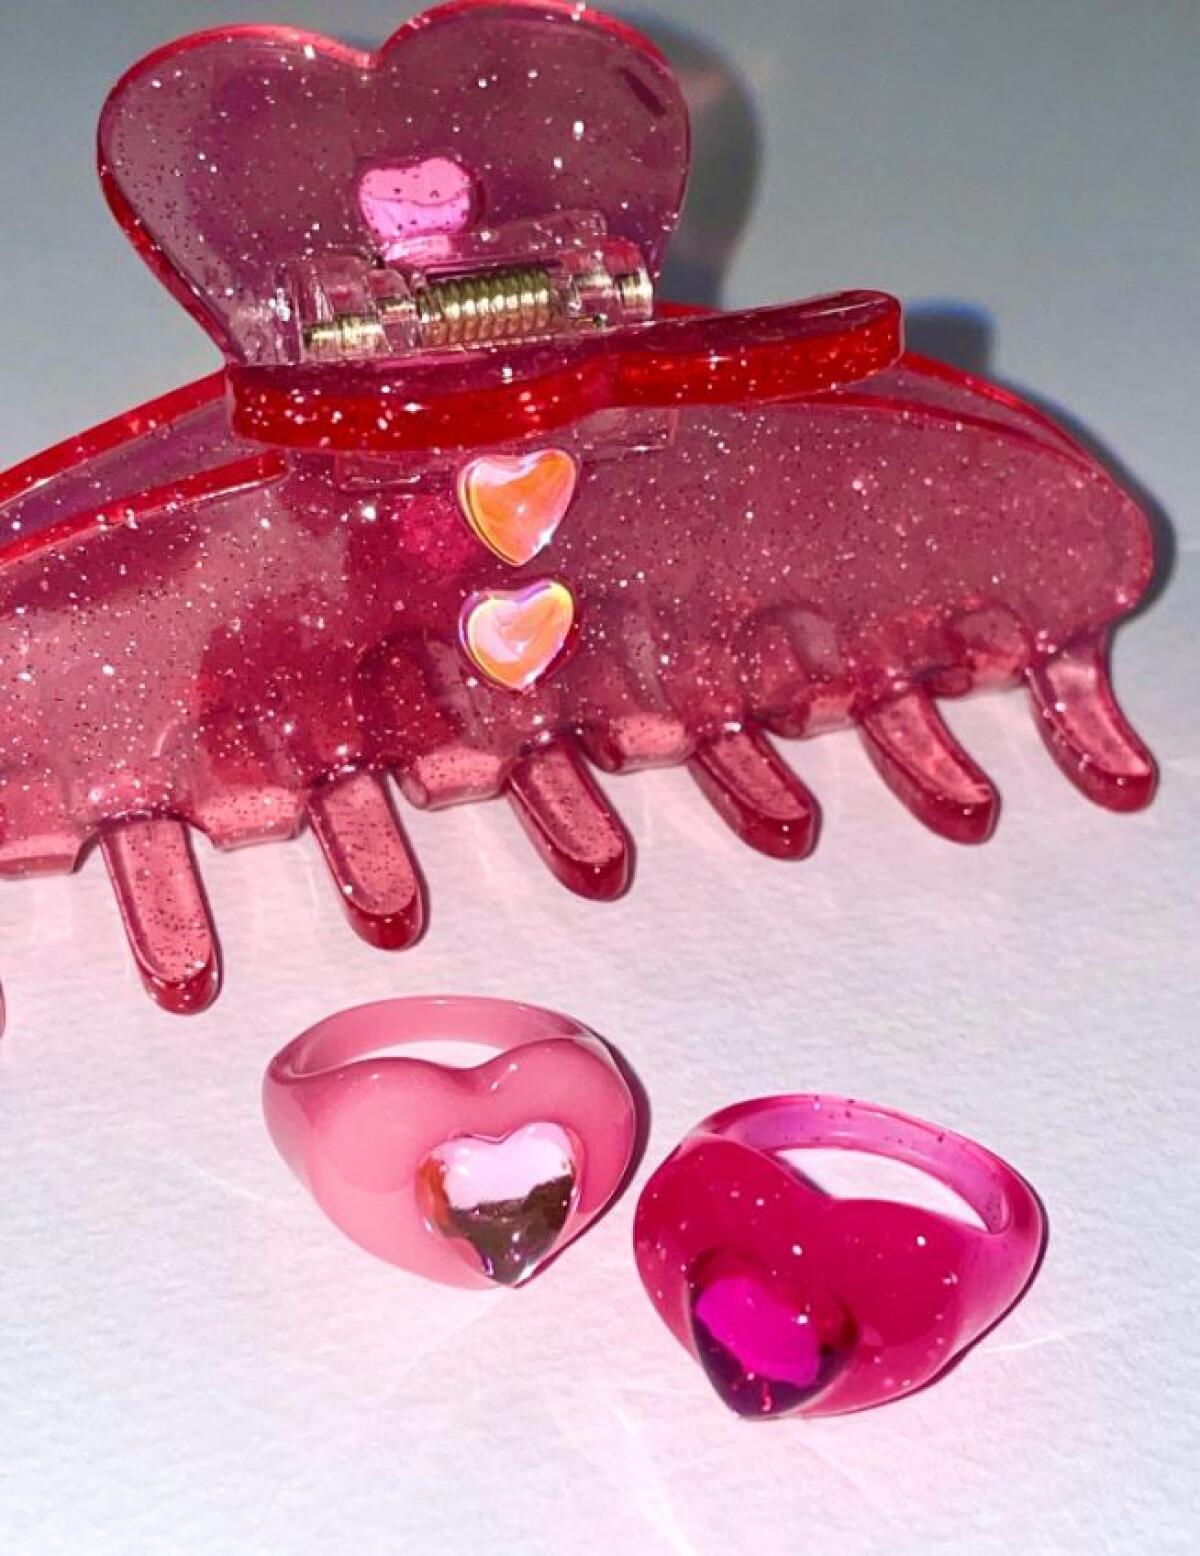 Pink hair clip and two heart-shaped rings